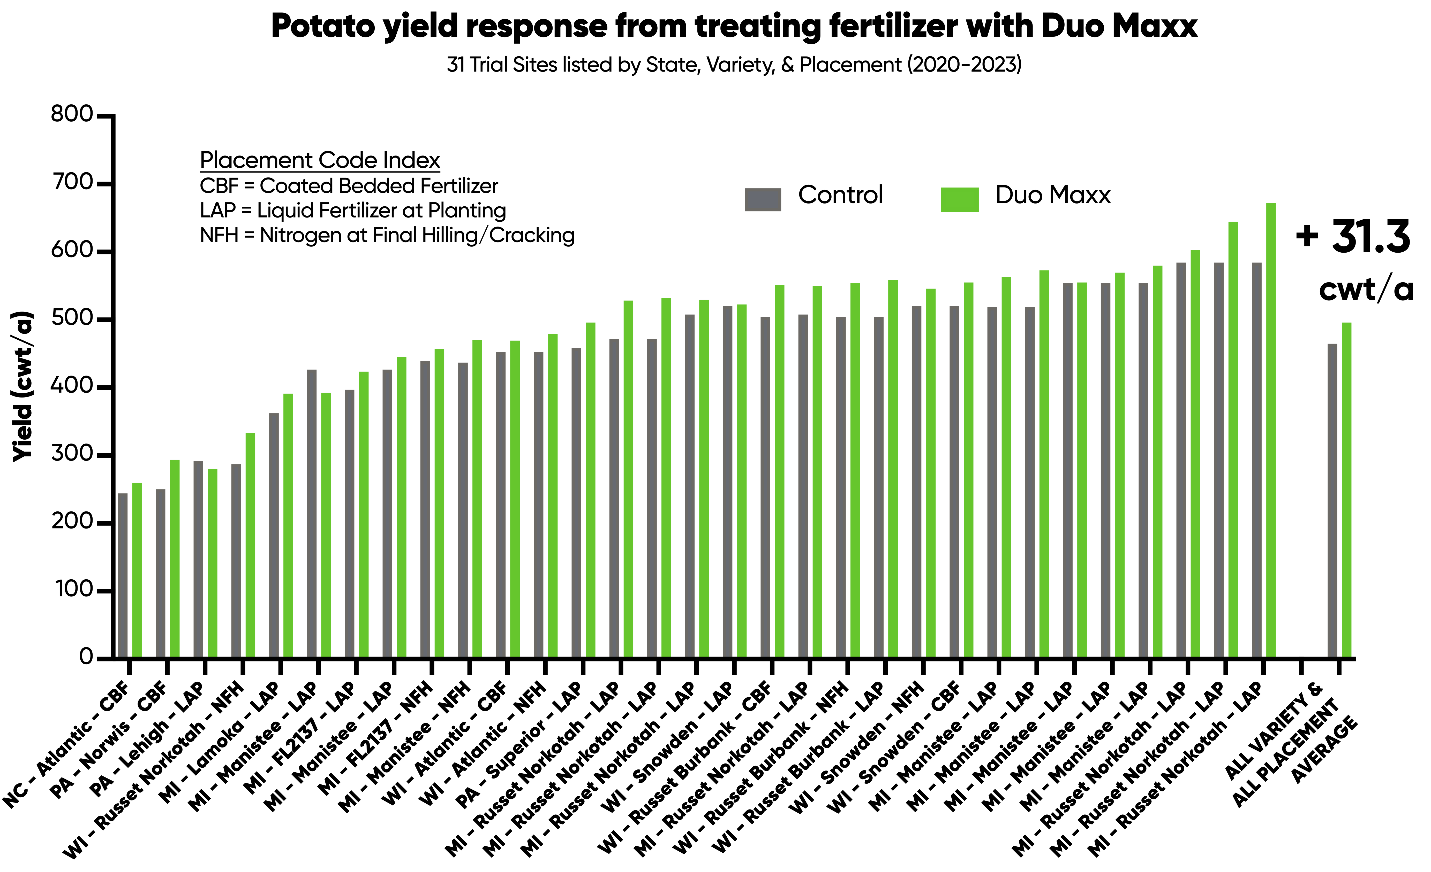 A graph of green and grey lines

Description automatically generated